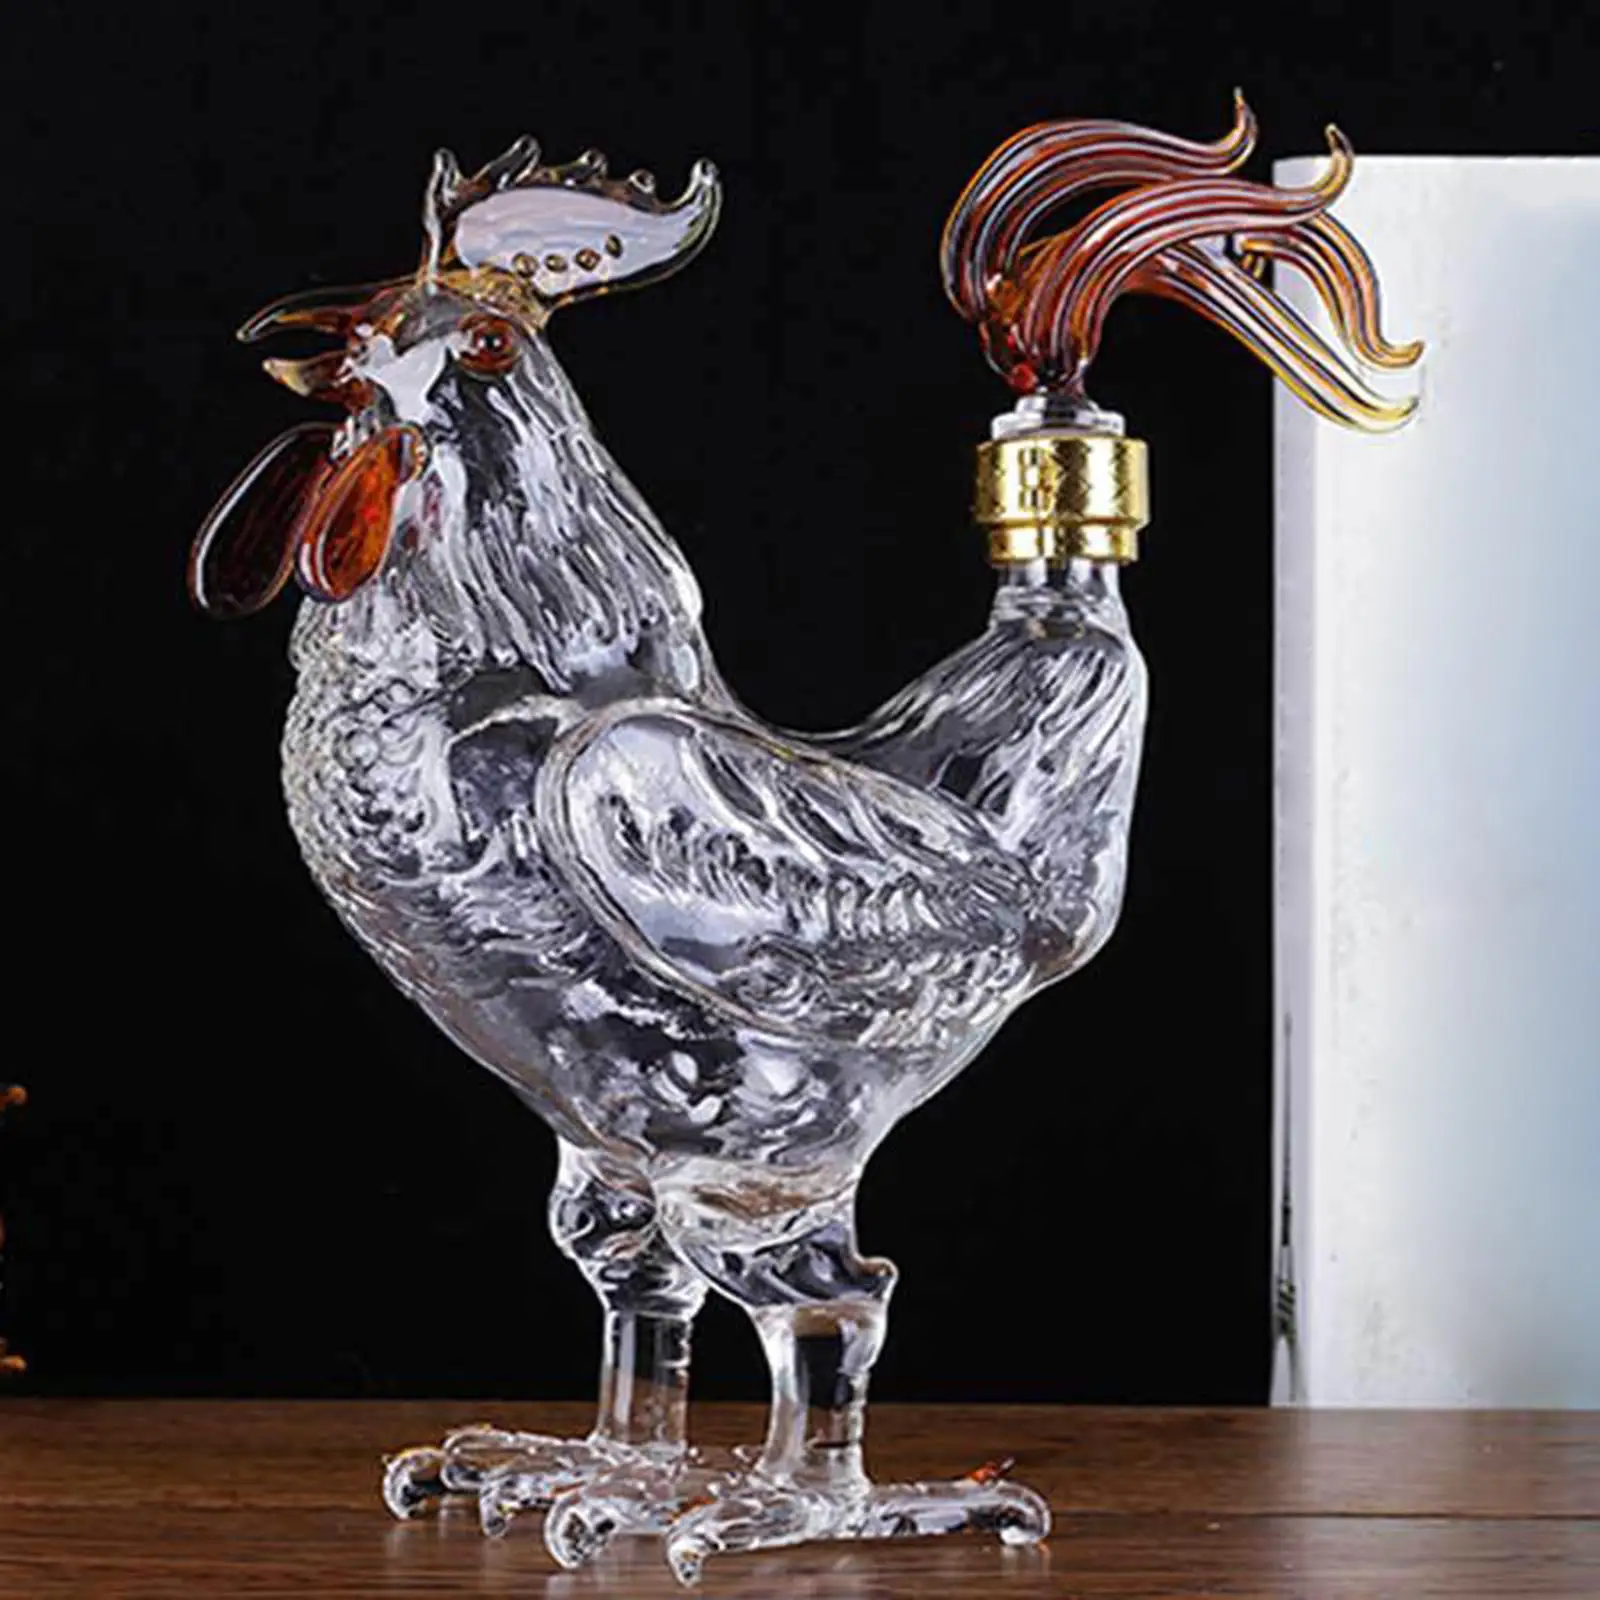  Shaped Liquor Decanters Hand-Blown High Borosilicate Glass Novelty  Wine Bottle for  Present Entertaining Drinkware Bar Adults